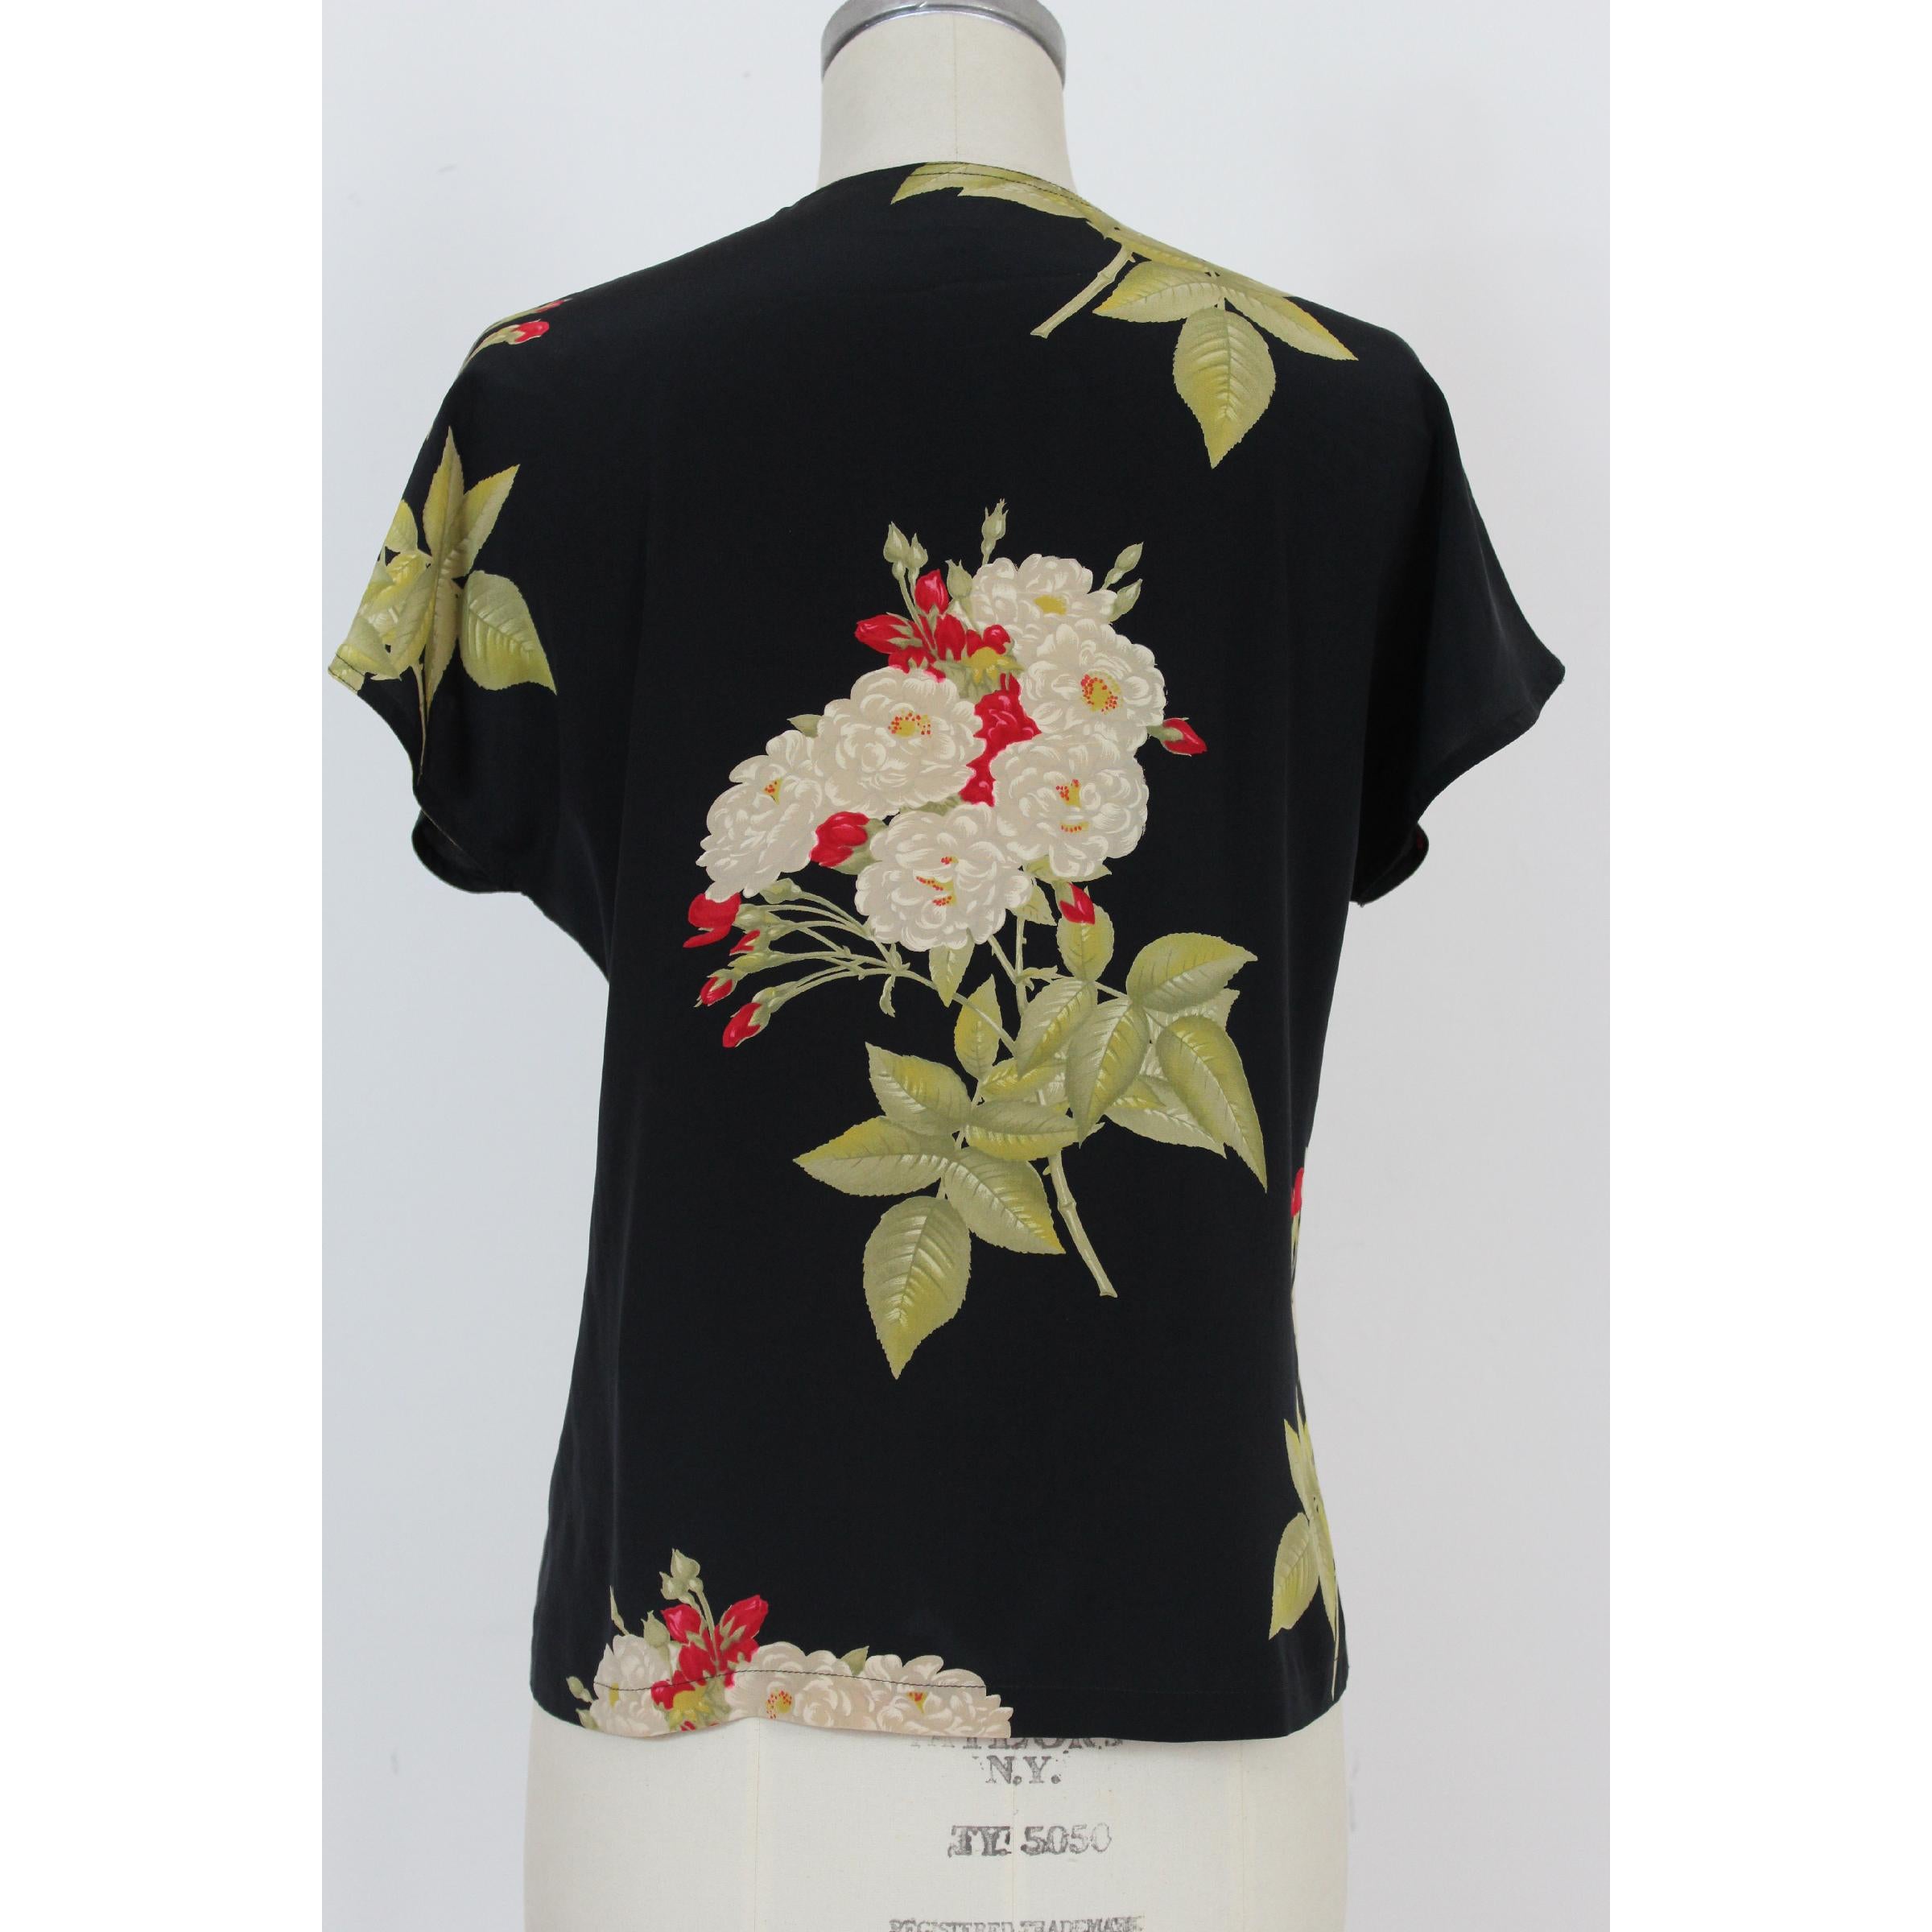 Vintage women's shirt Genny by Gianni Versace, 80's. Floral pattern with black background, 100% silk, short sleeve. Made in Italy. Excellent vintage condition. 

Size: 44 It 10 Us 12 Uk 

Shoulder: 44 cm 
Bust/Chest: 50 cm 
Sleeve: 12 cm 
Length: 61